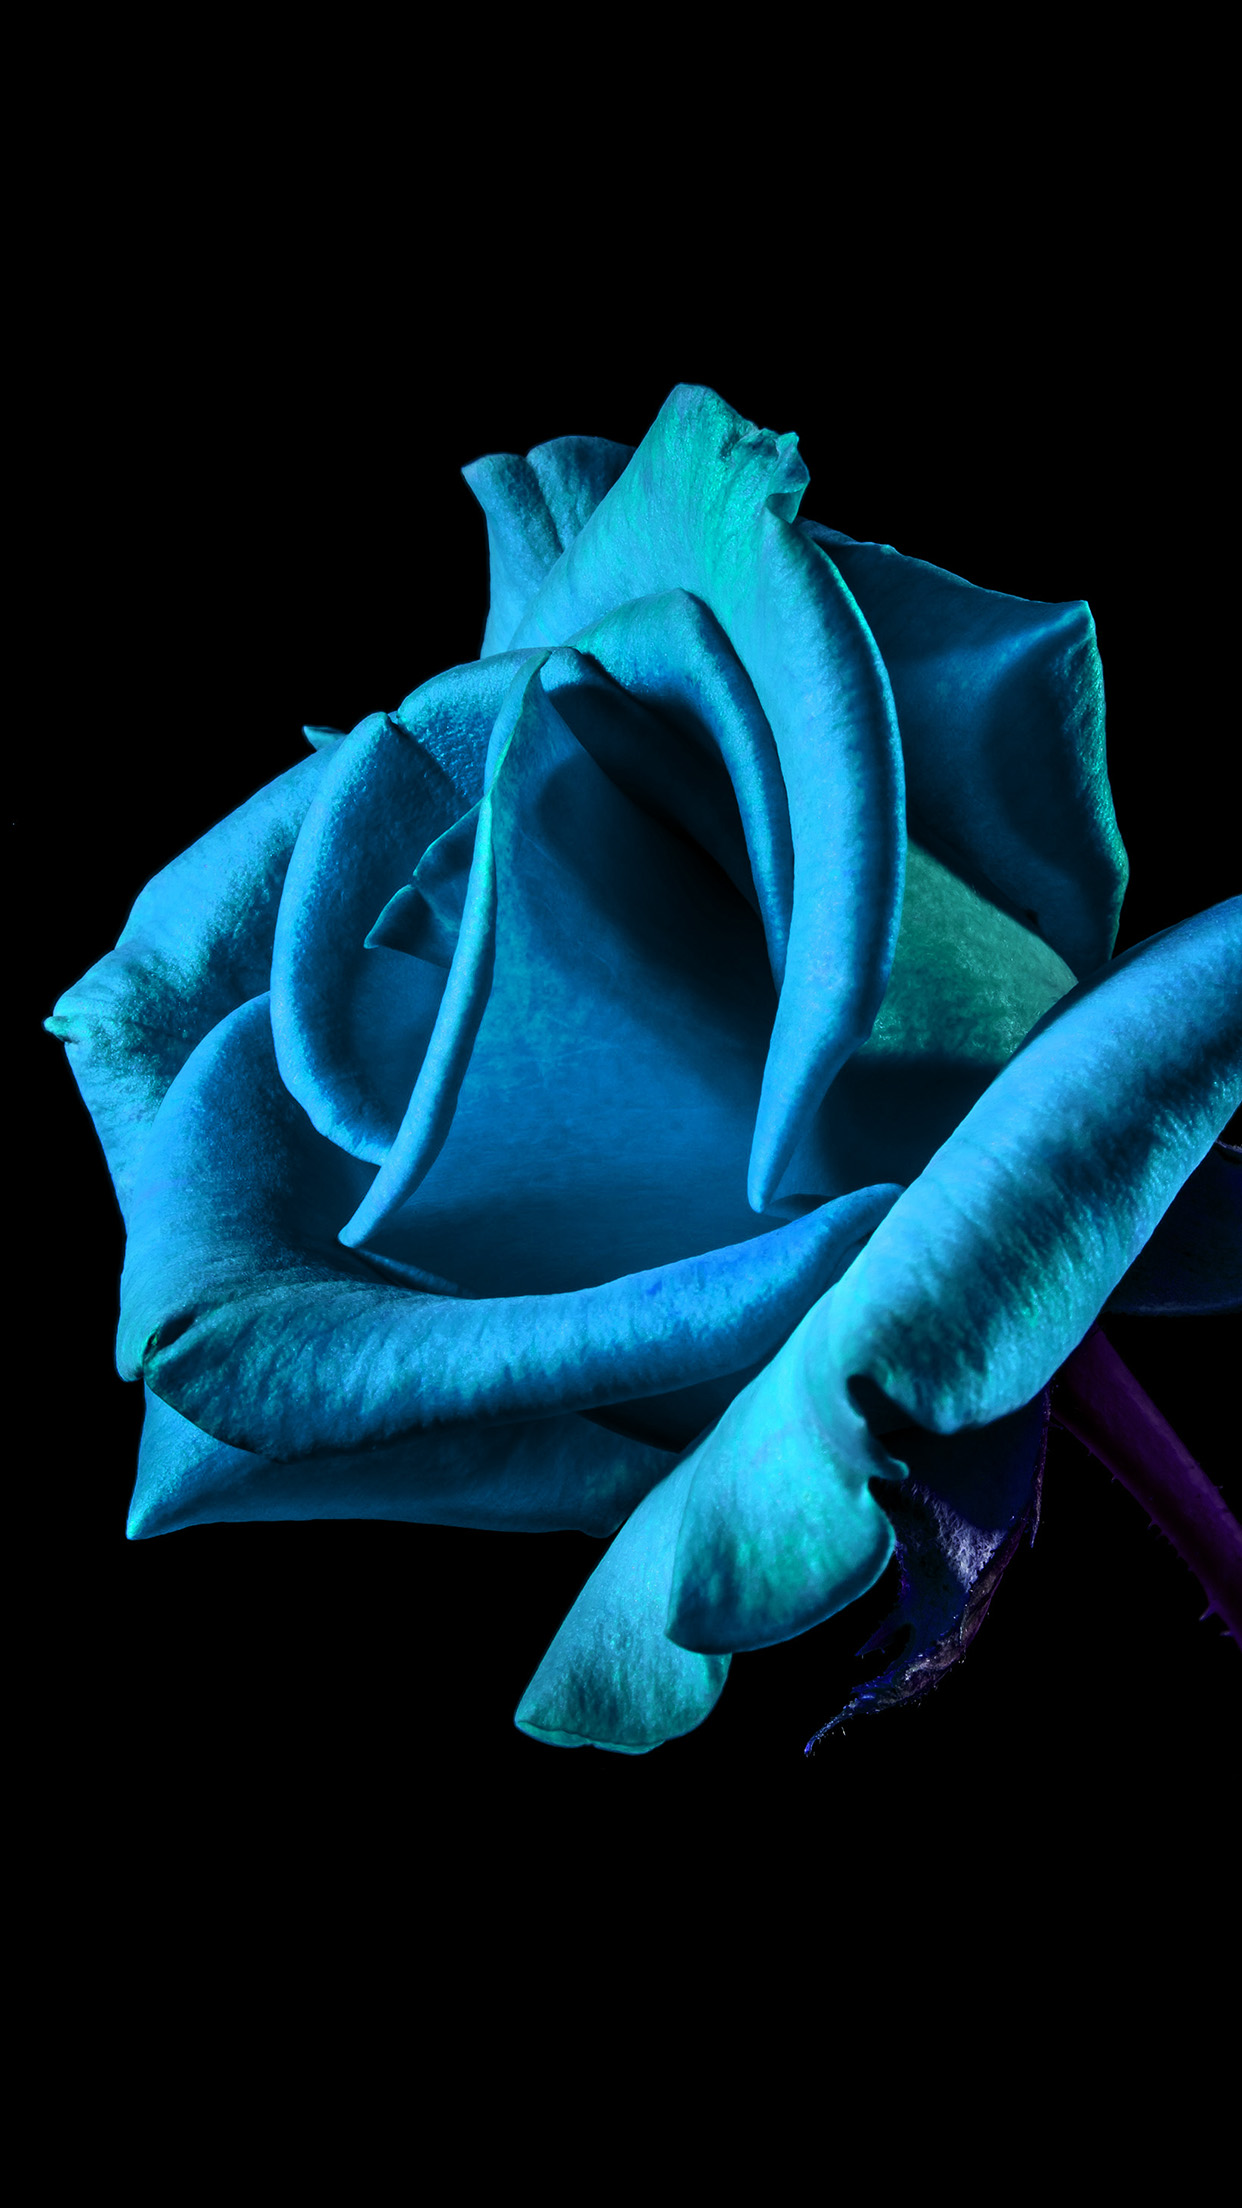 Flower Rose Blue Dark Beautiful Best Nature Android - Blue Flower Wallpaper For Iphone , HD Wallpaper & Backgrounds